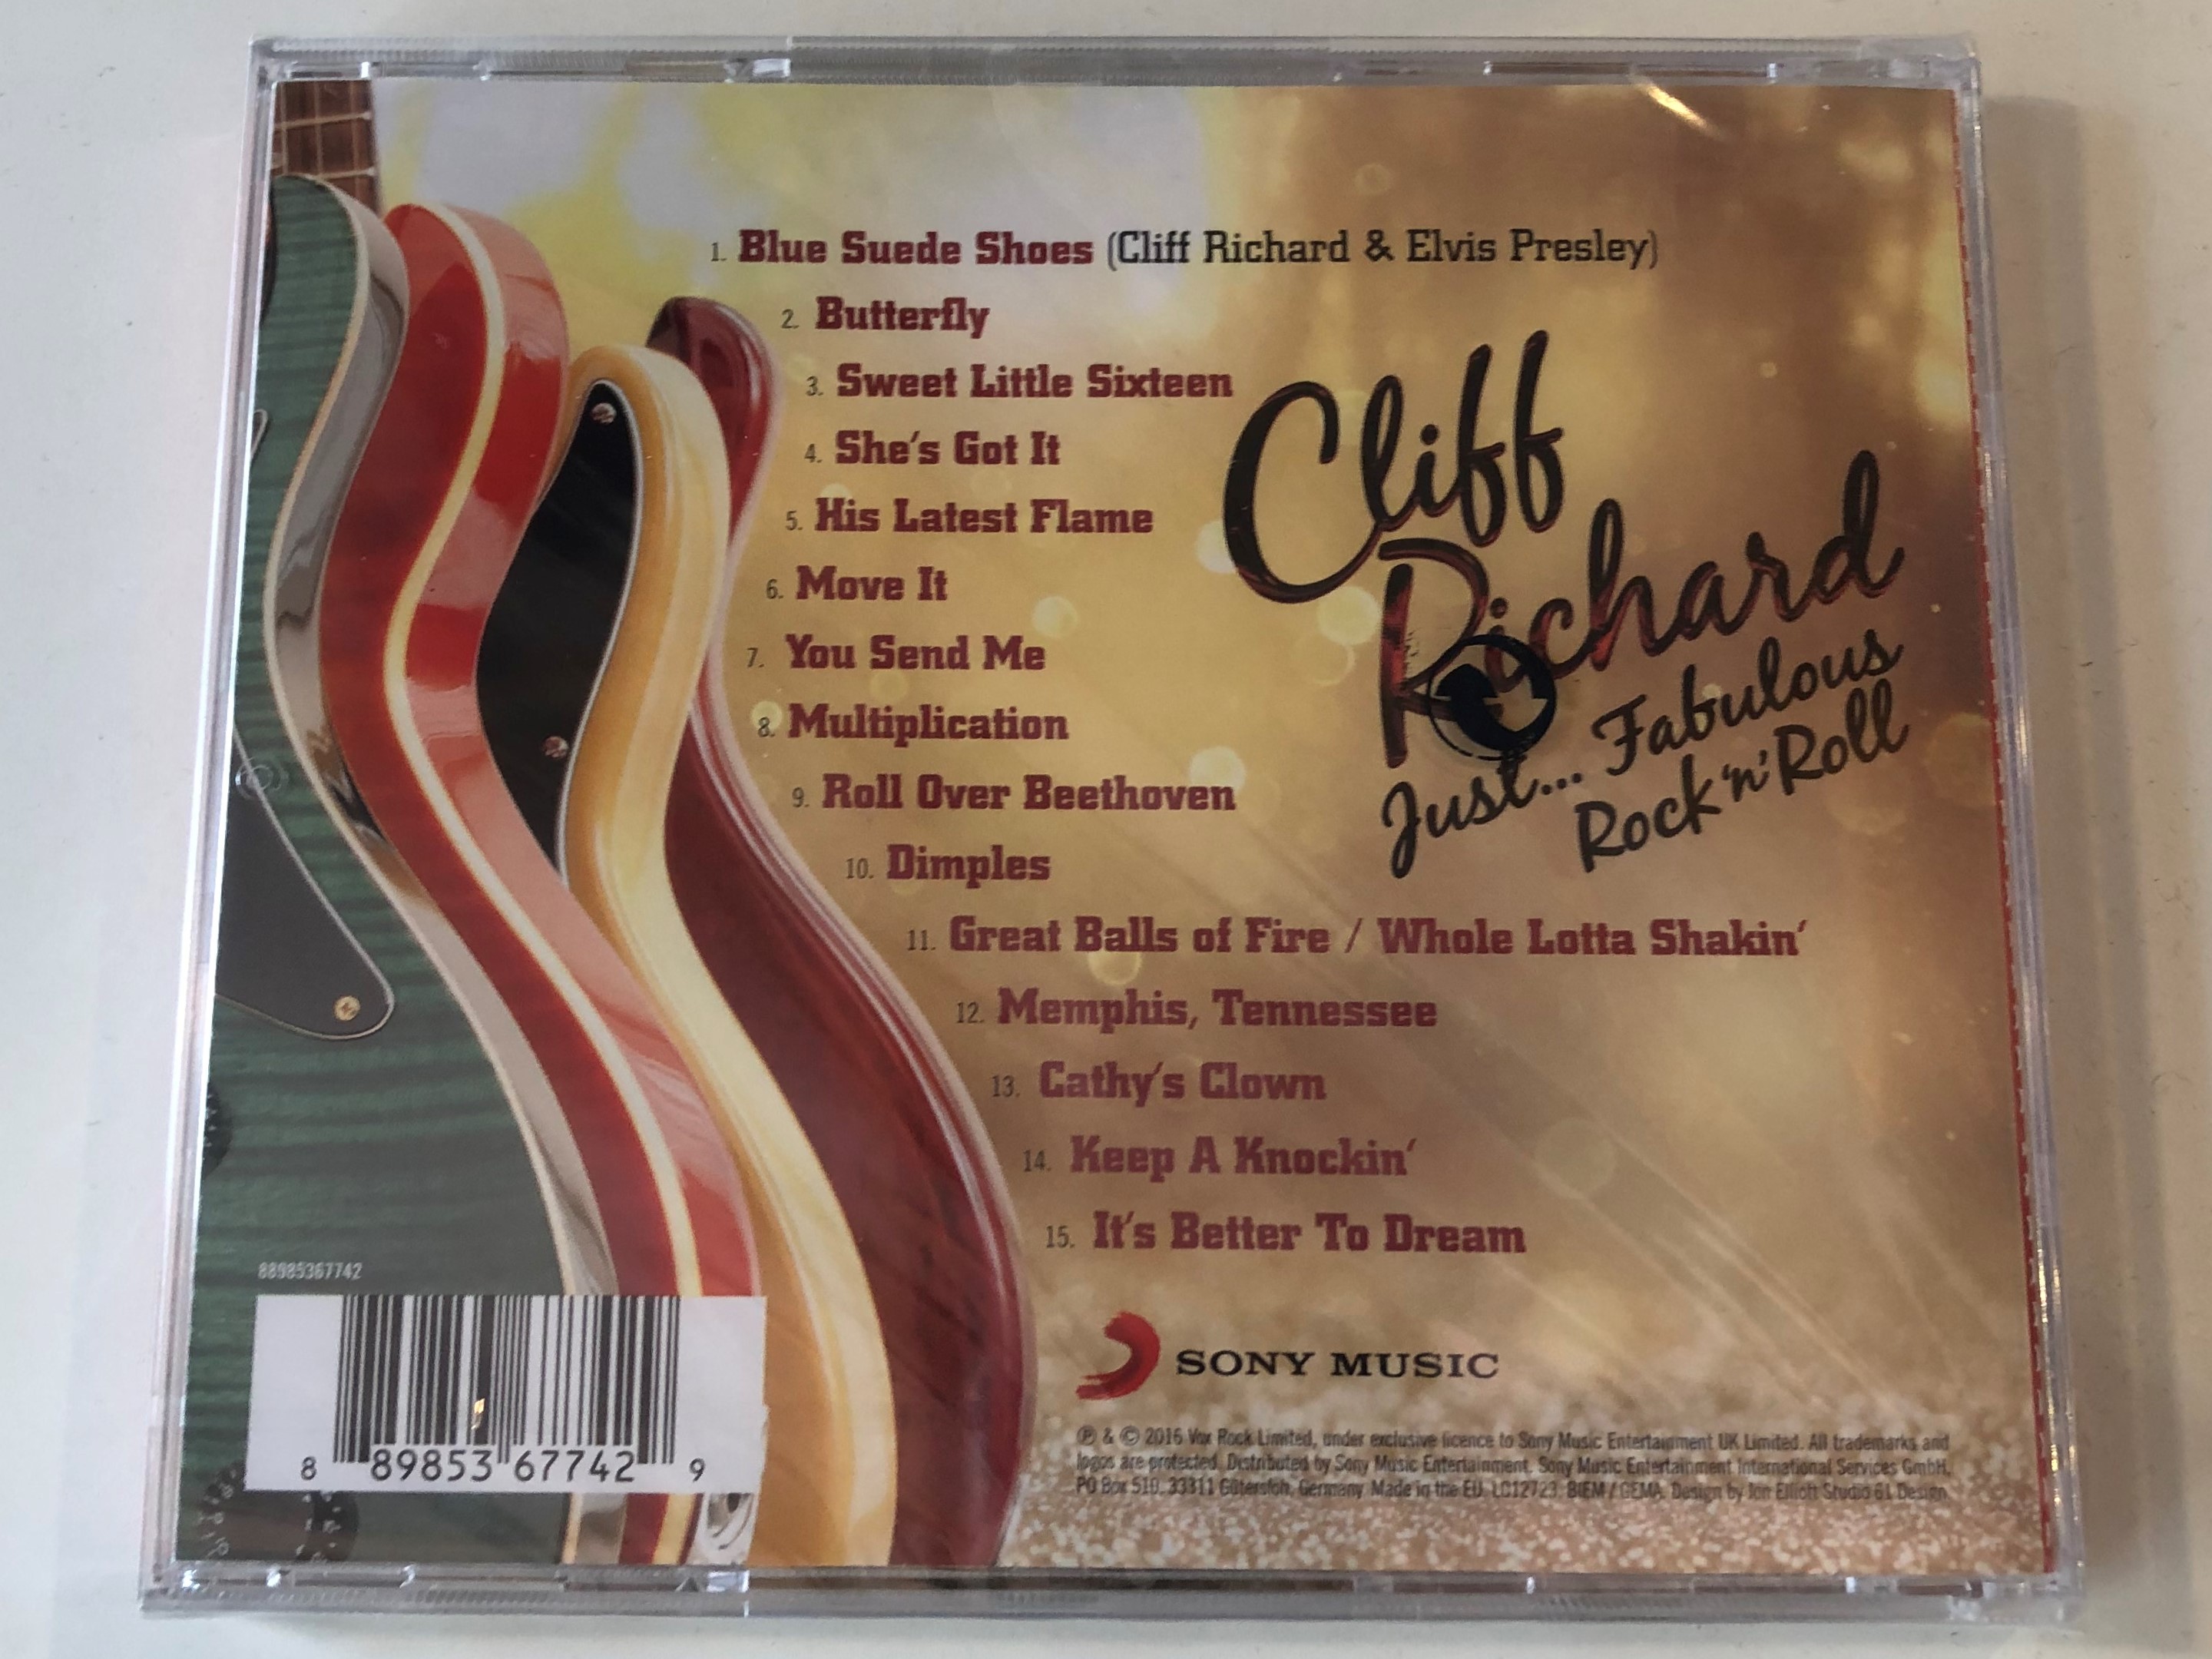 cliff-richard-just...-fabulous-rock-n-roll-the-incredible-new-album-including-blue-suede-shoes-with-elvis-presley-and-roll-over-beethoven-sony-music-audio-cd-2016-88985367742-2-.jpg